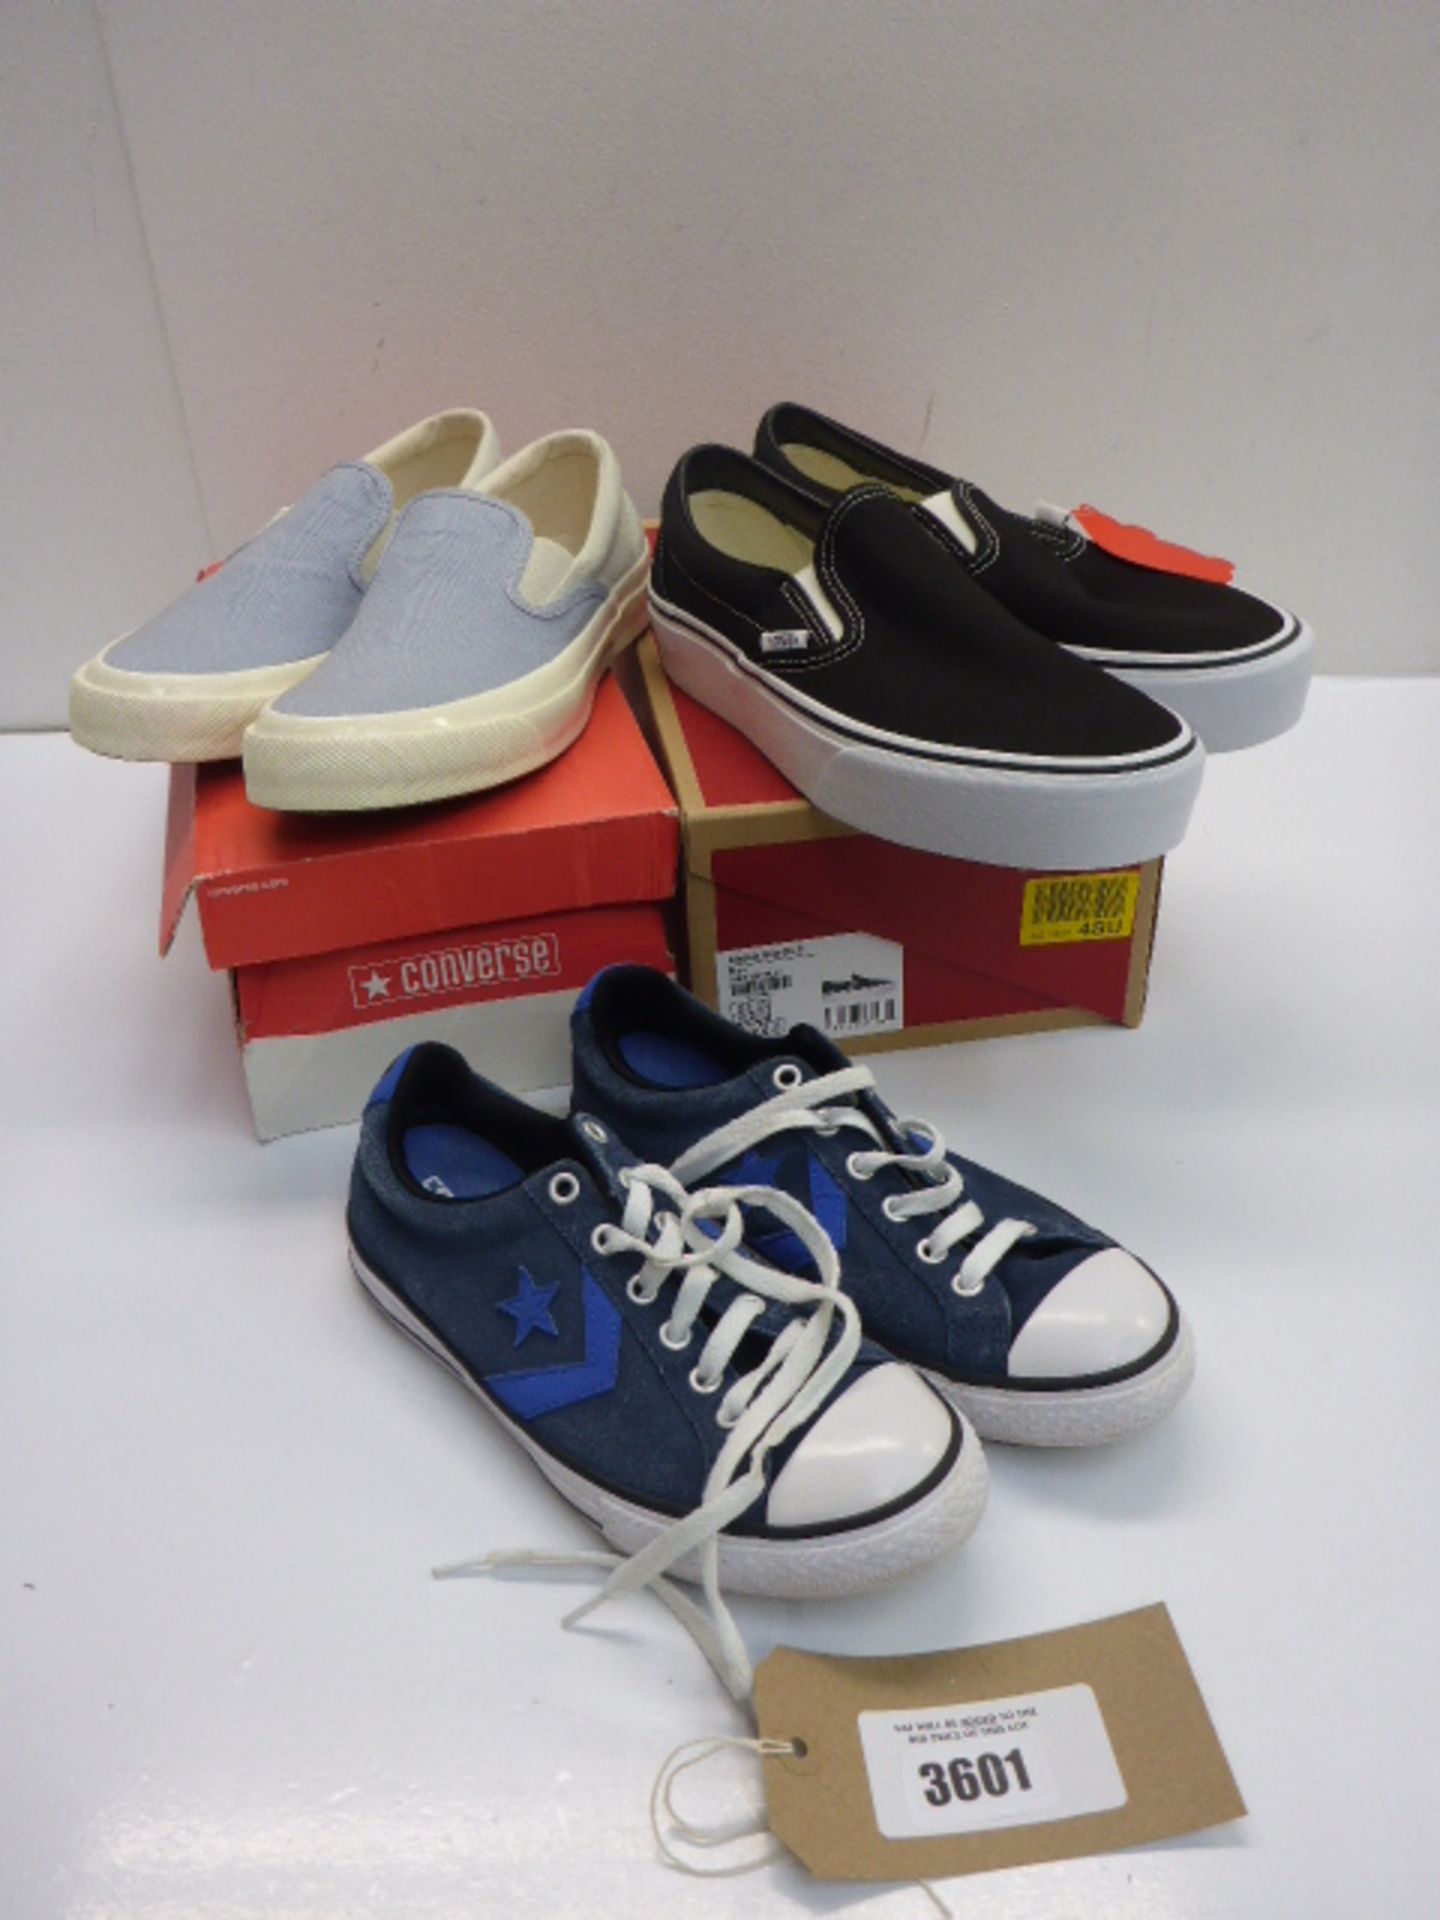 A pair of baby blue slip-on Converse UK 7, a pair of black slip-on Vans UK 7.5 and a pair of navy